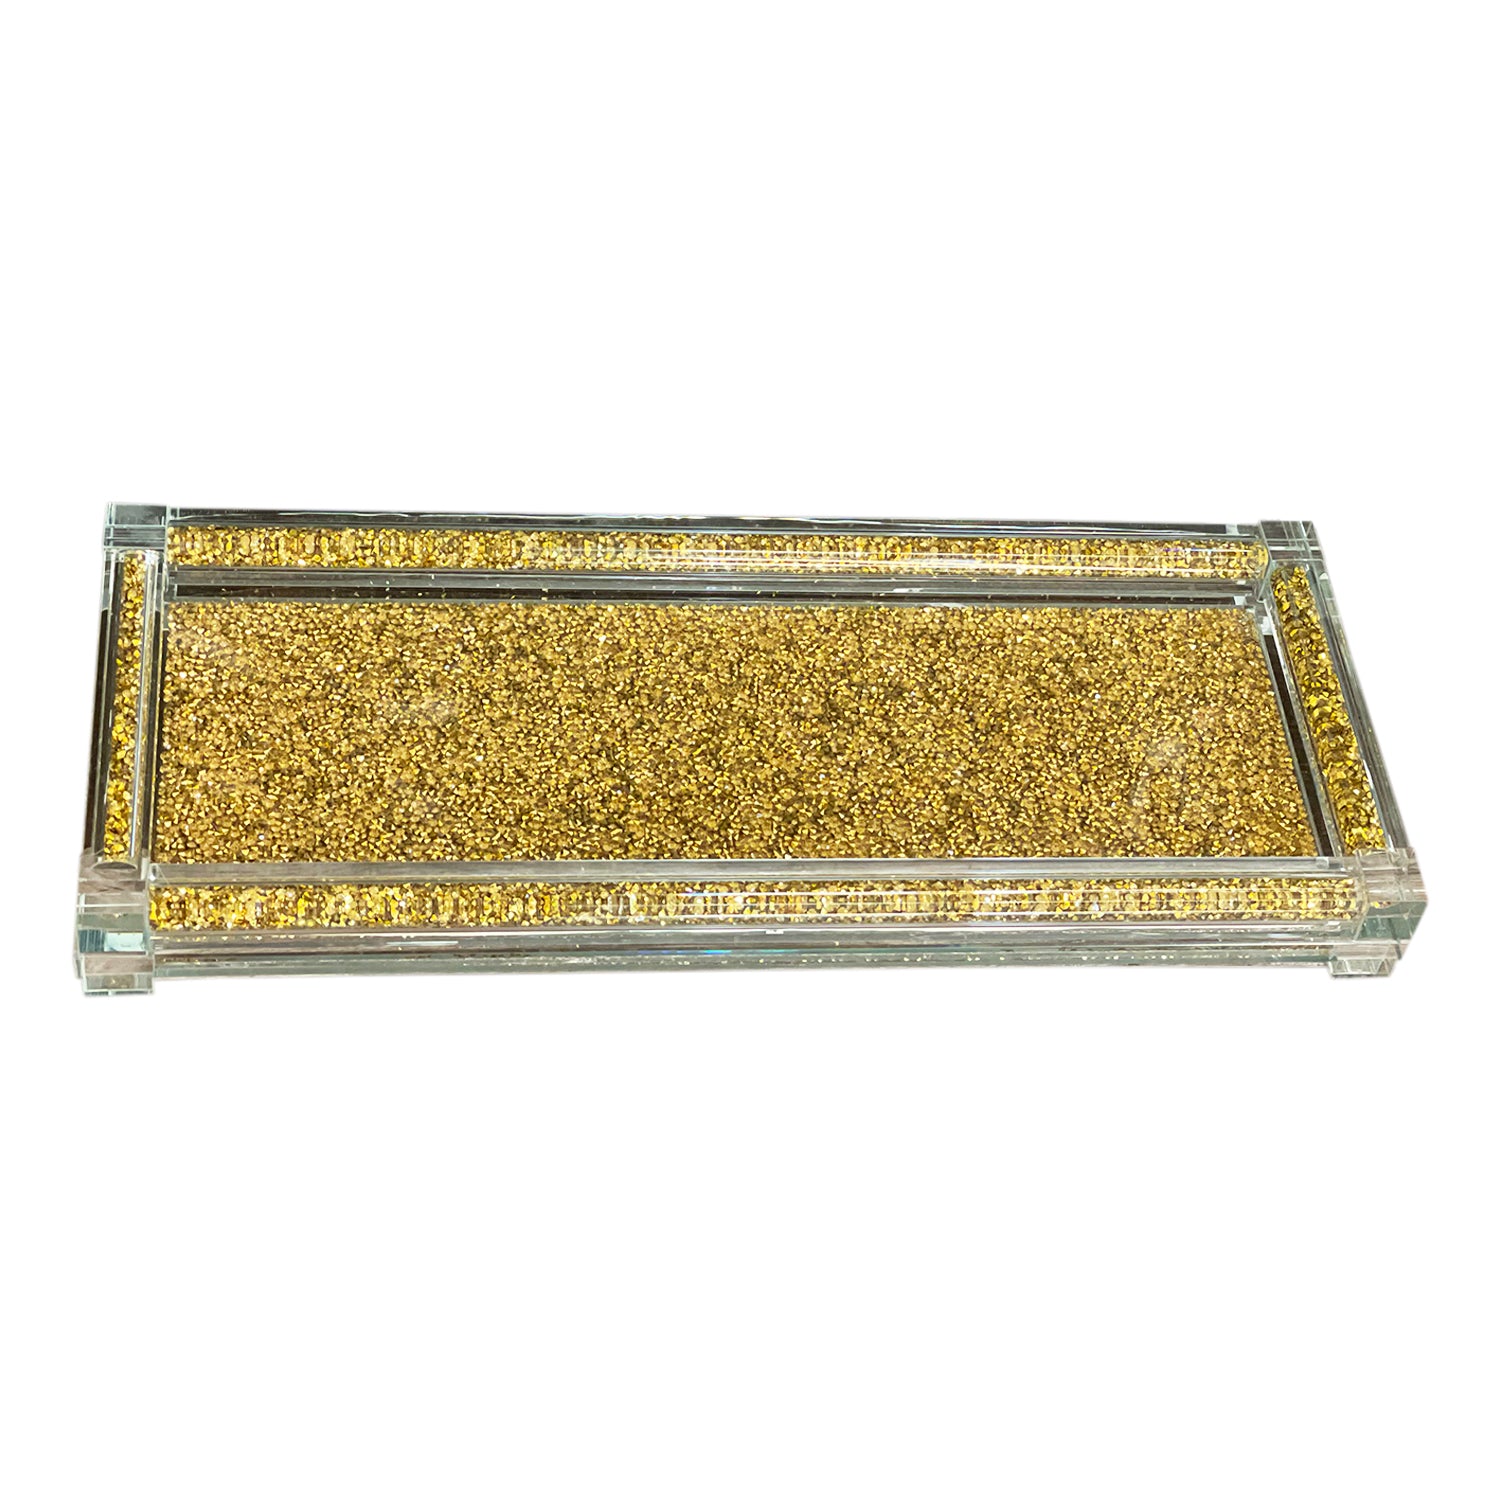 Ambrose Exquisite Medium Glass Tray in Gift Box gold-glass